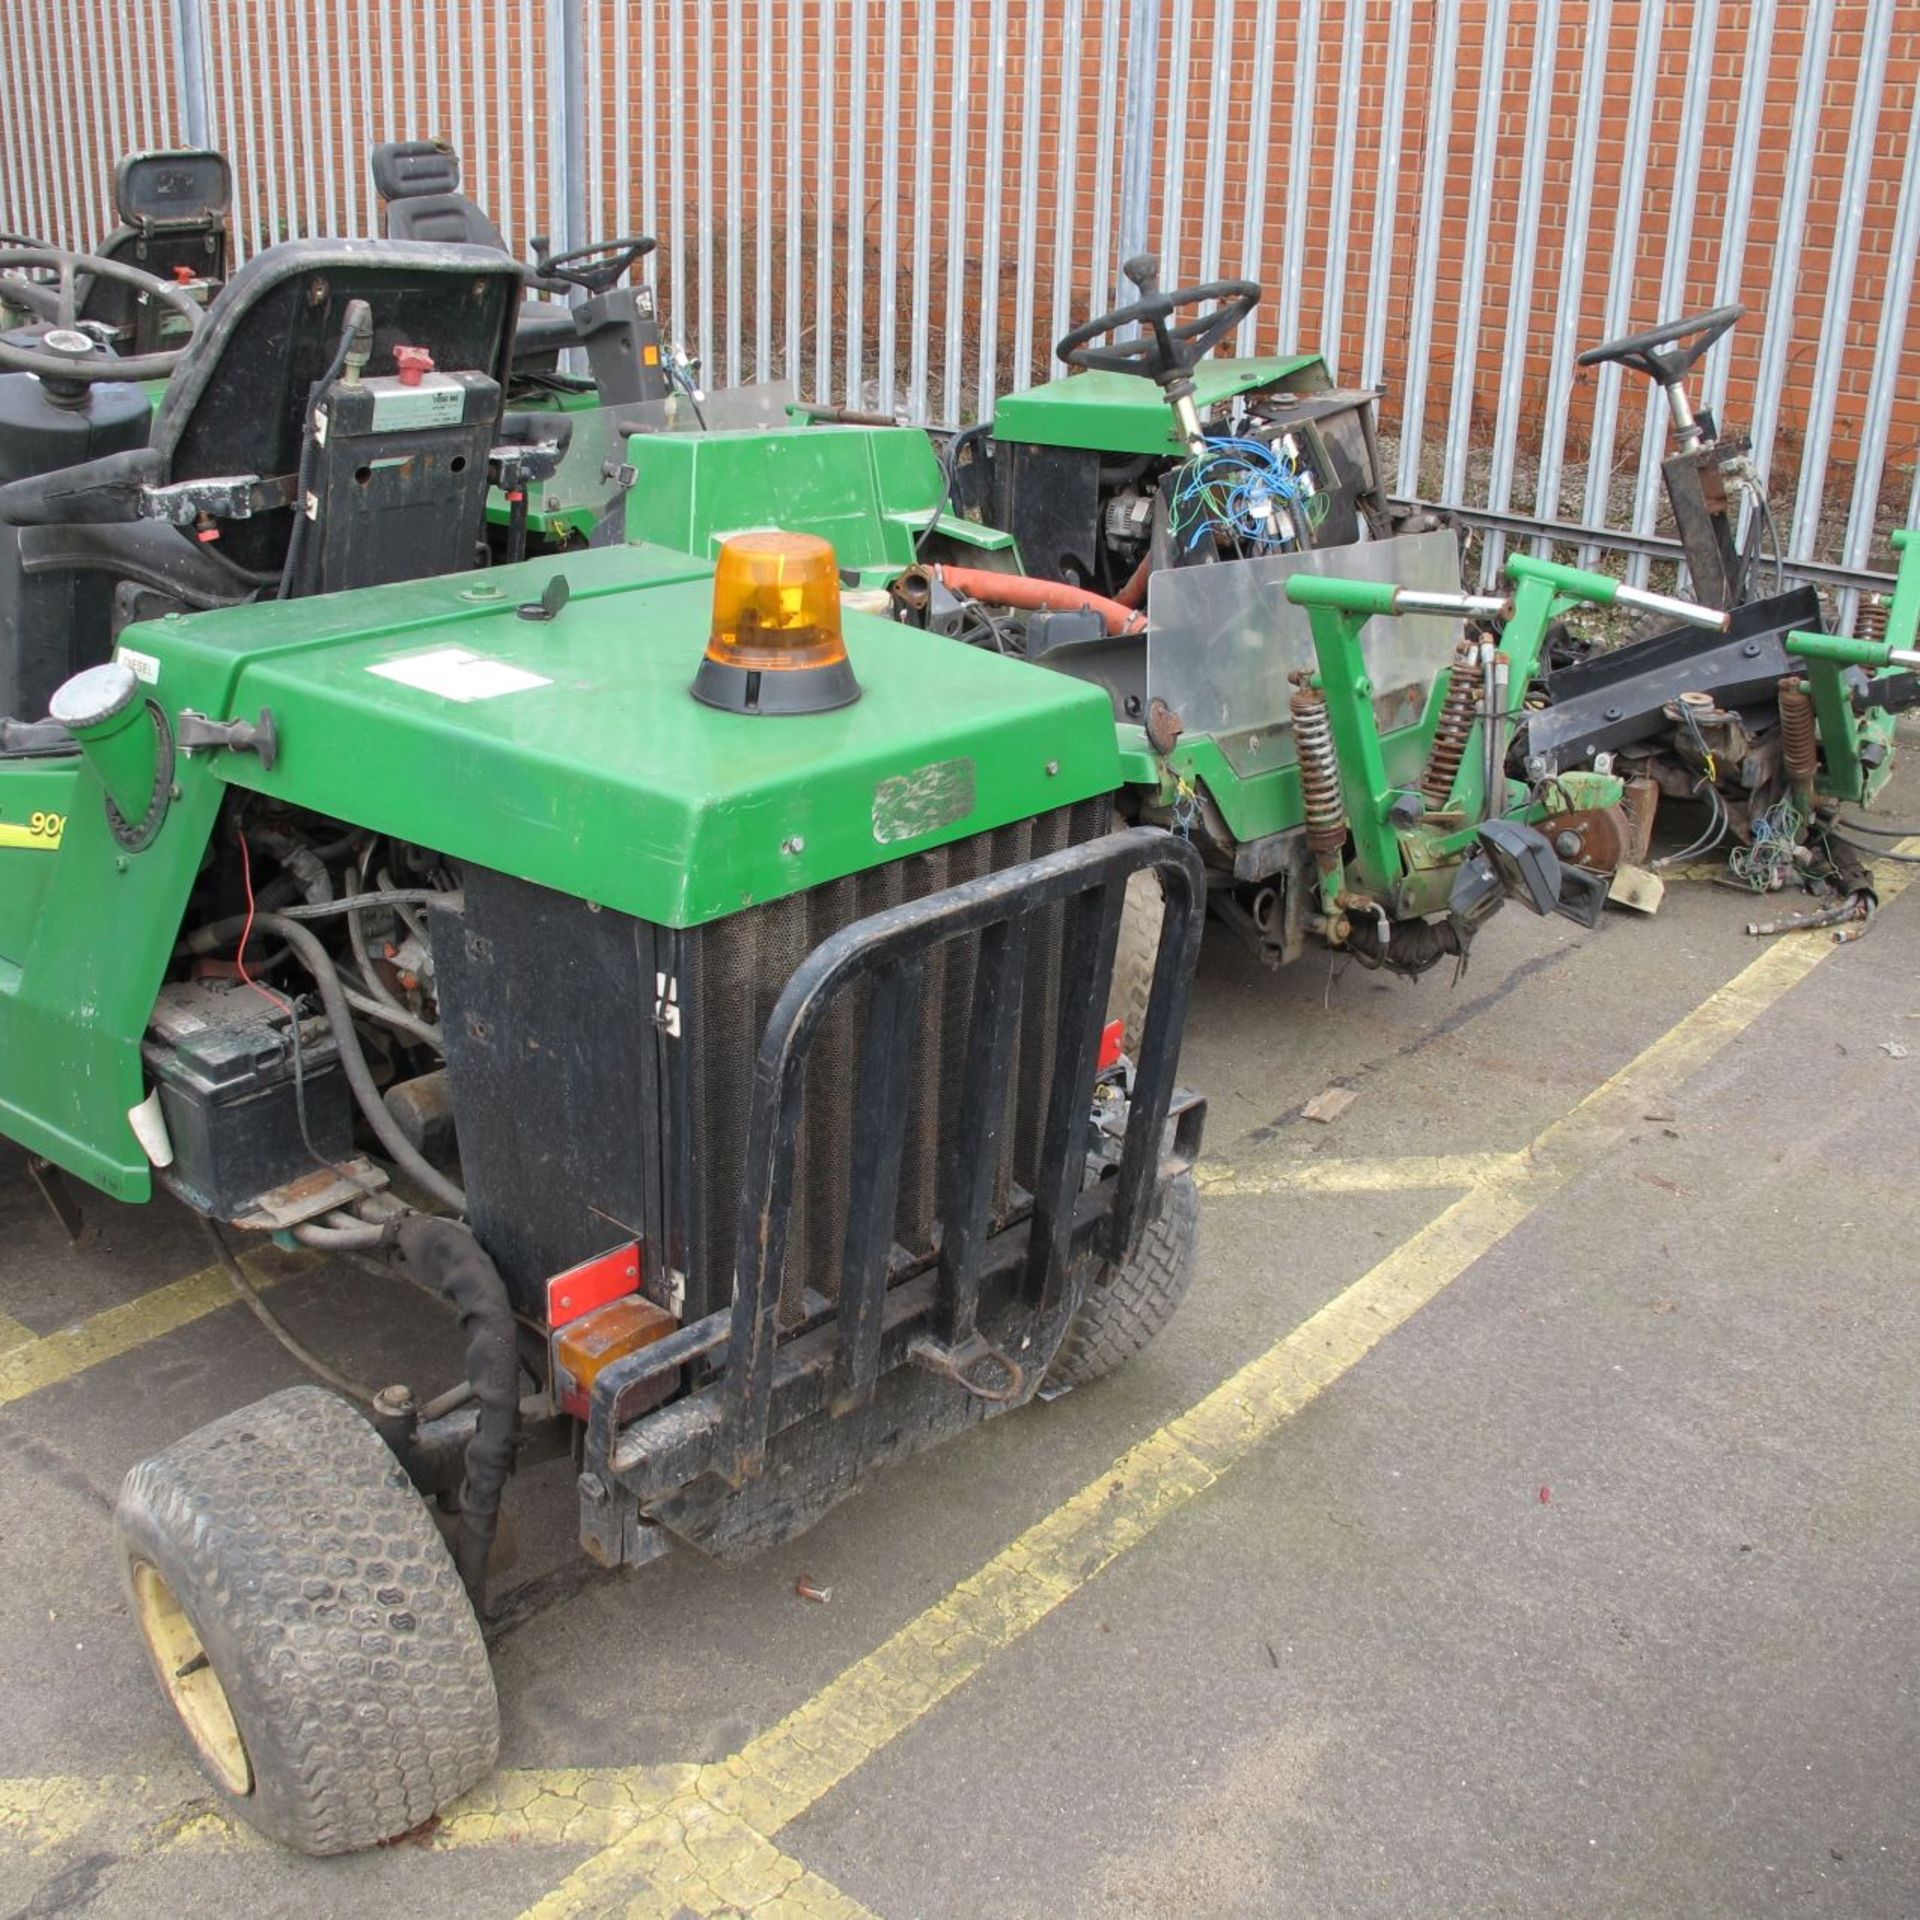 3 x Roberine 900 Mowers for parts c/w Yanmar 2 x 2, 3 cylinder diesel engines.  Please note there - Image 2 of 2